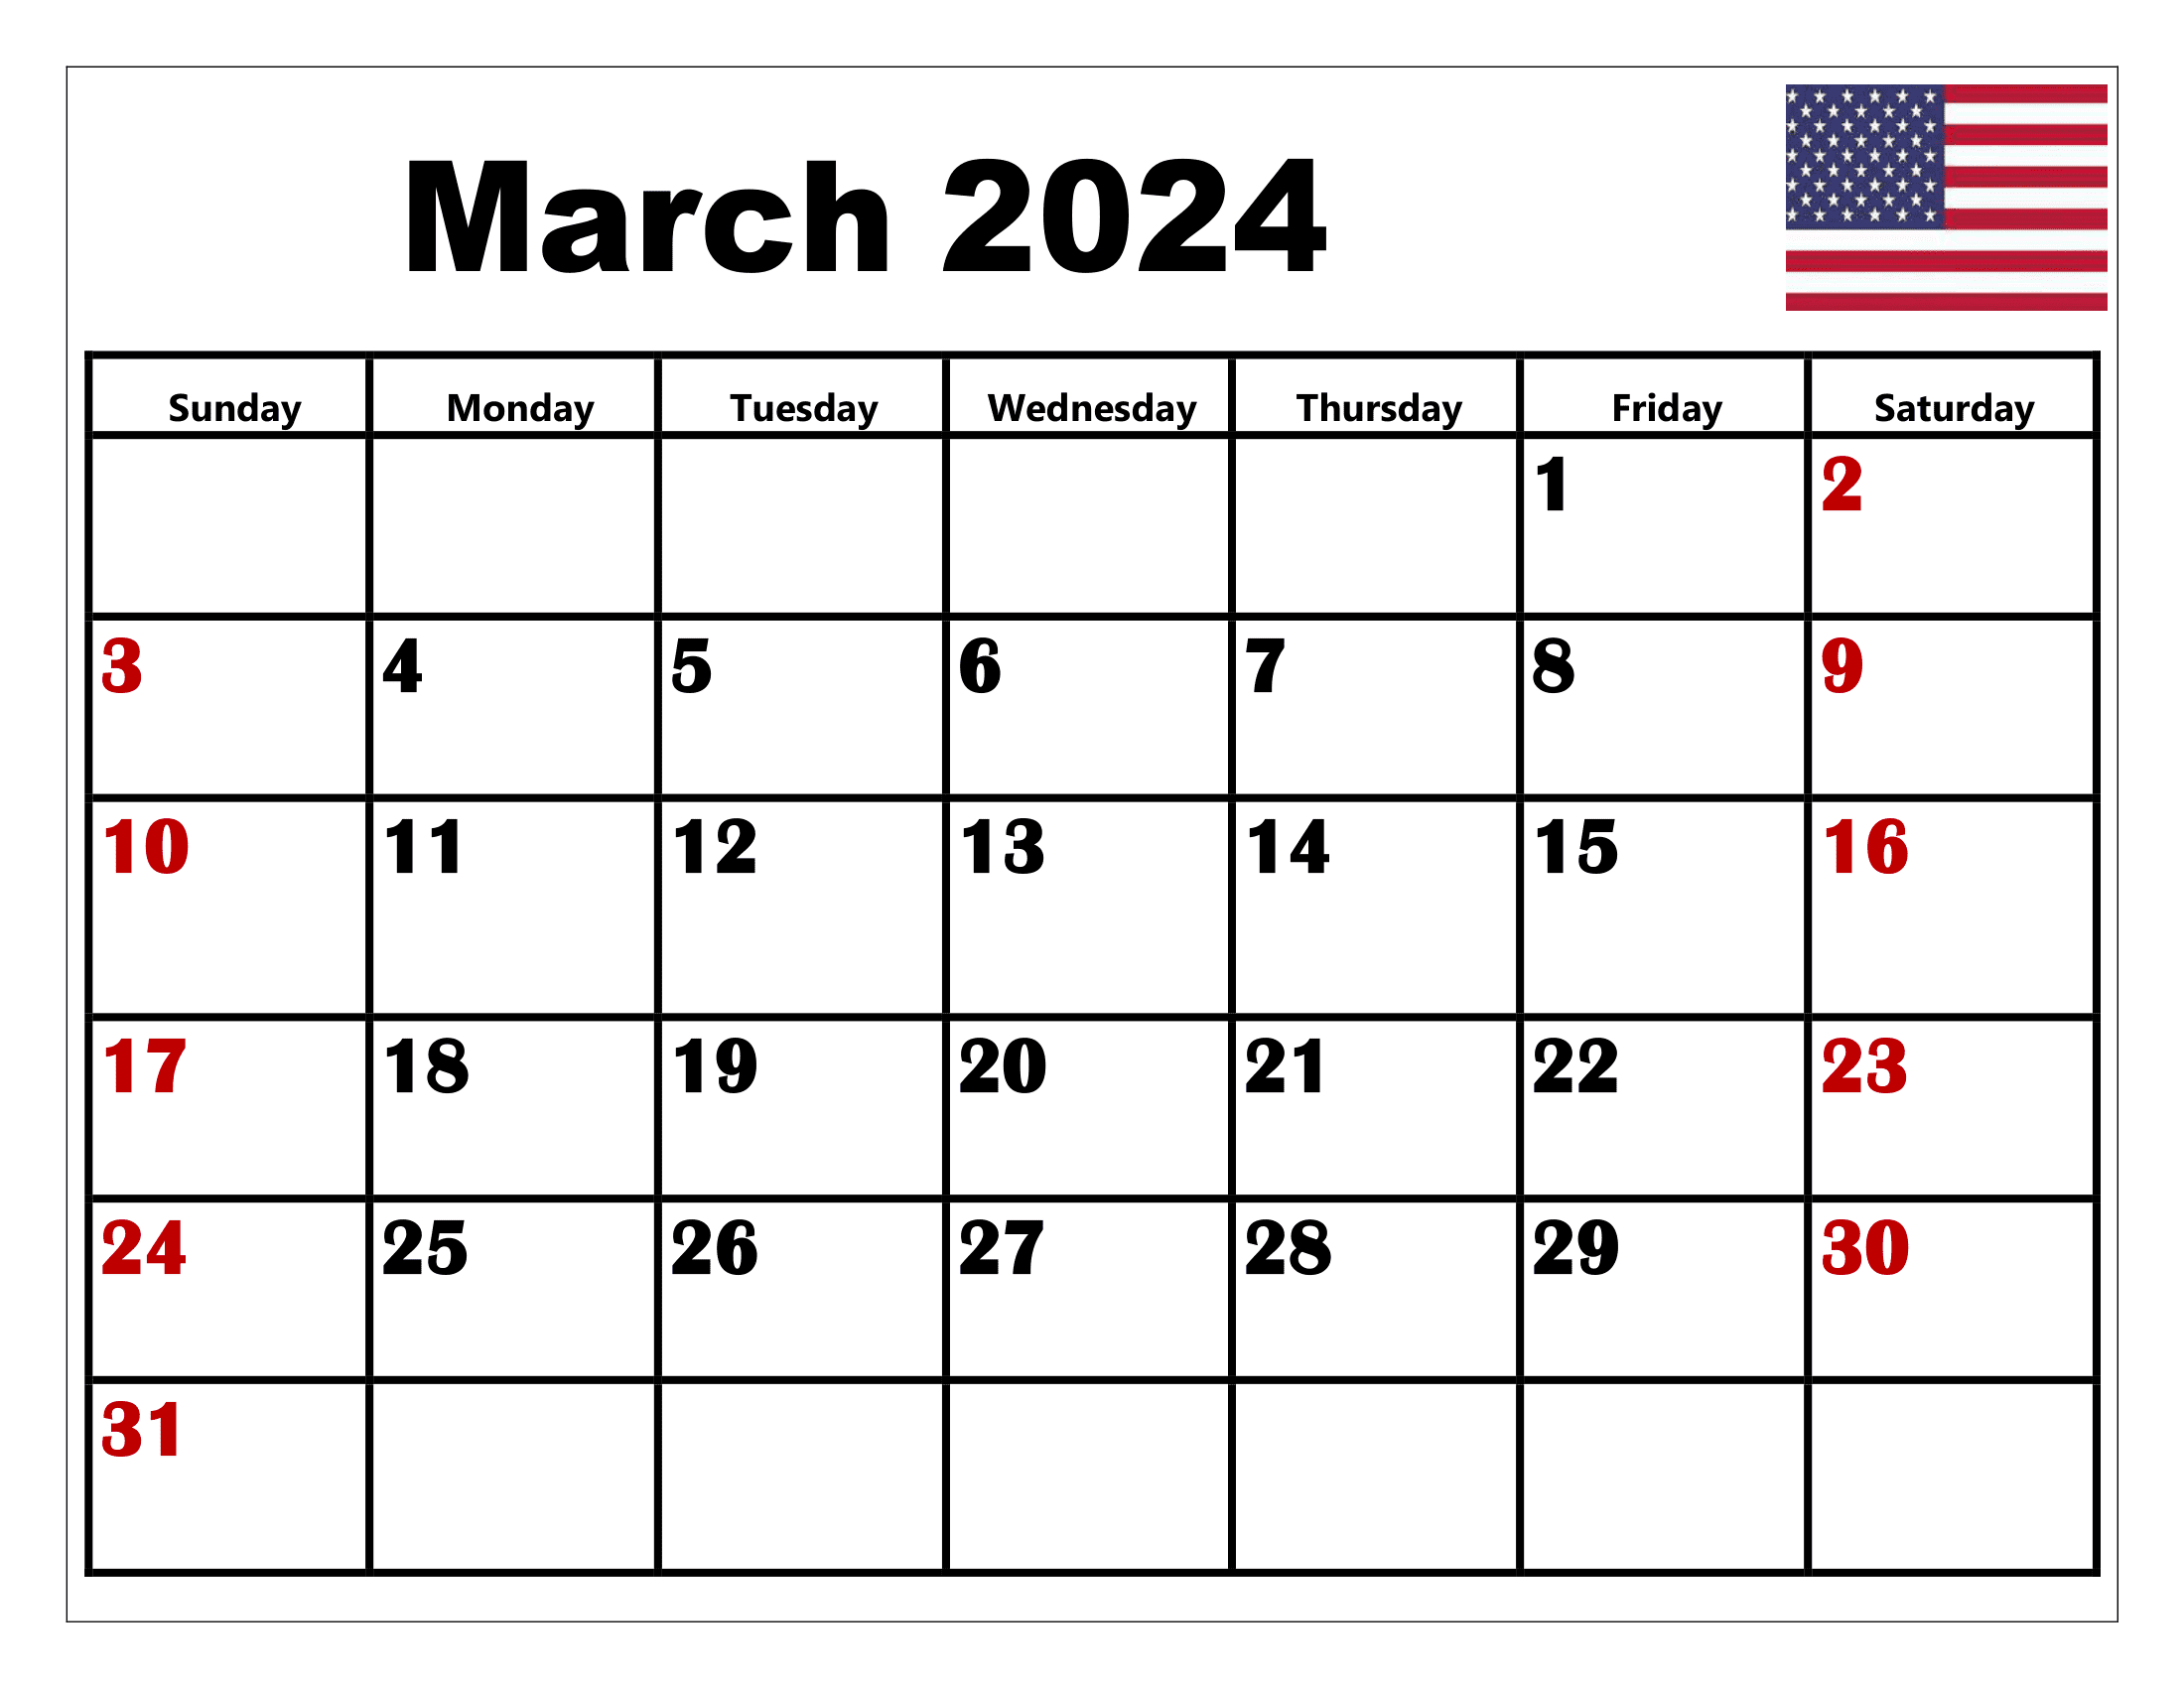 March 2024 Calendar Printable Pdf With Holidays Template Free for Printable March 2024 Calendar With Holidays